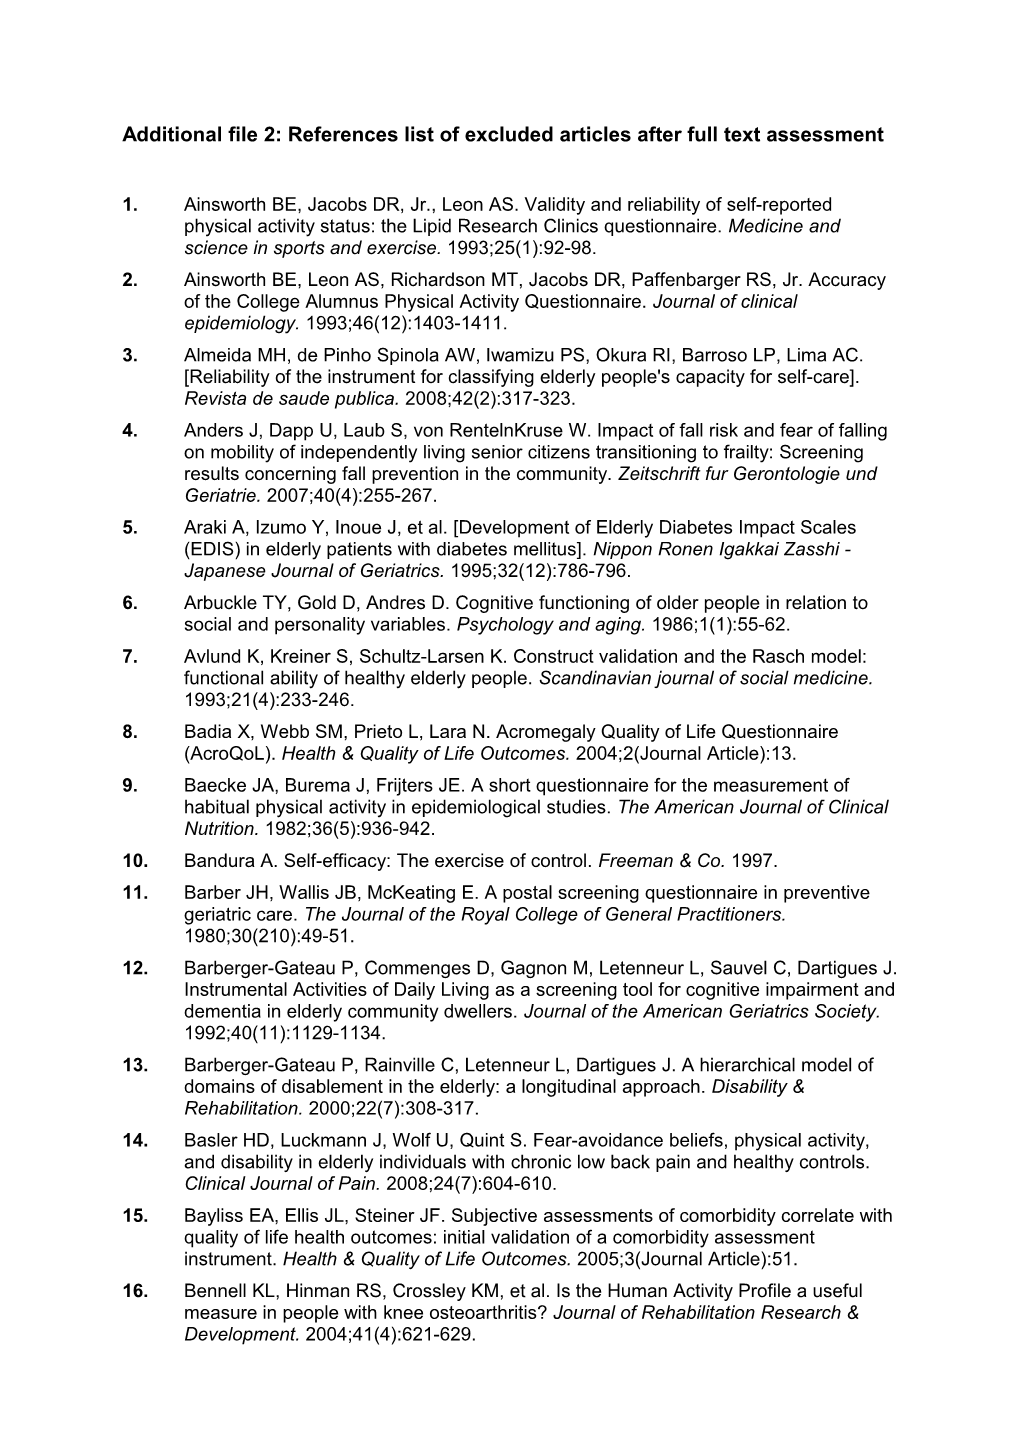 Appendix 5: Reference List of Excluded Articles After Full Text Assessment